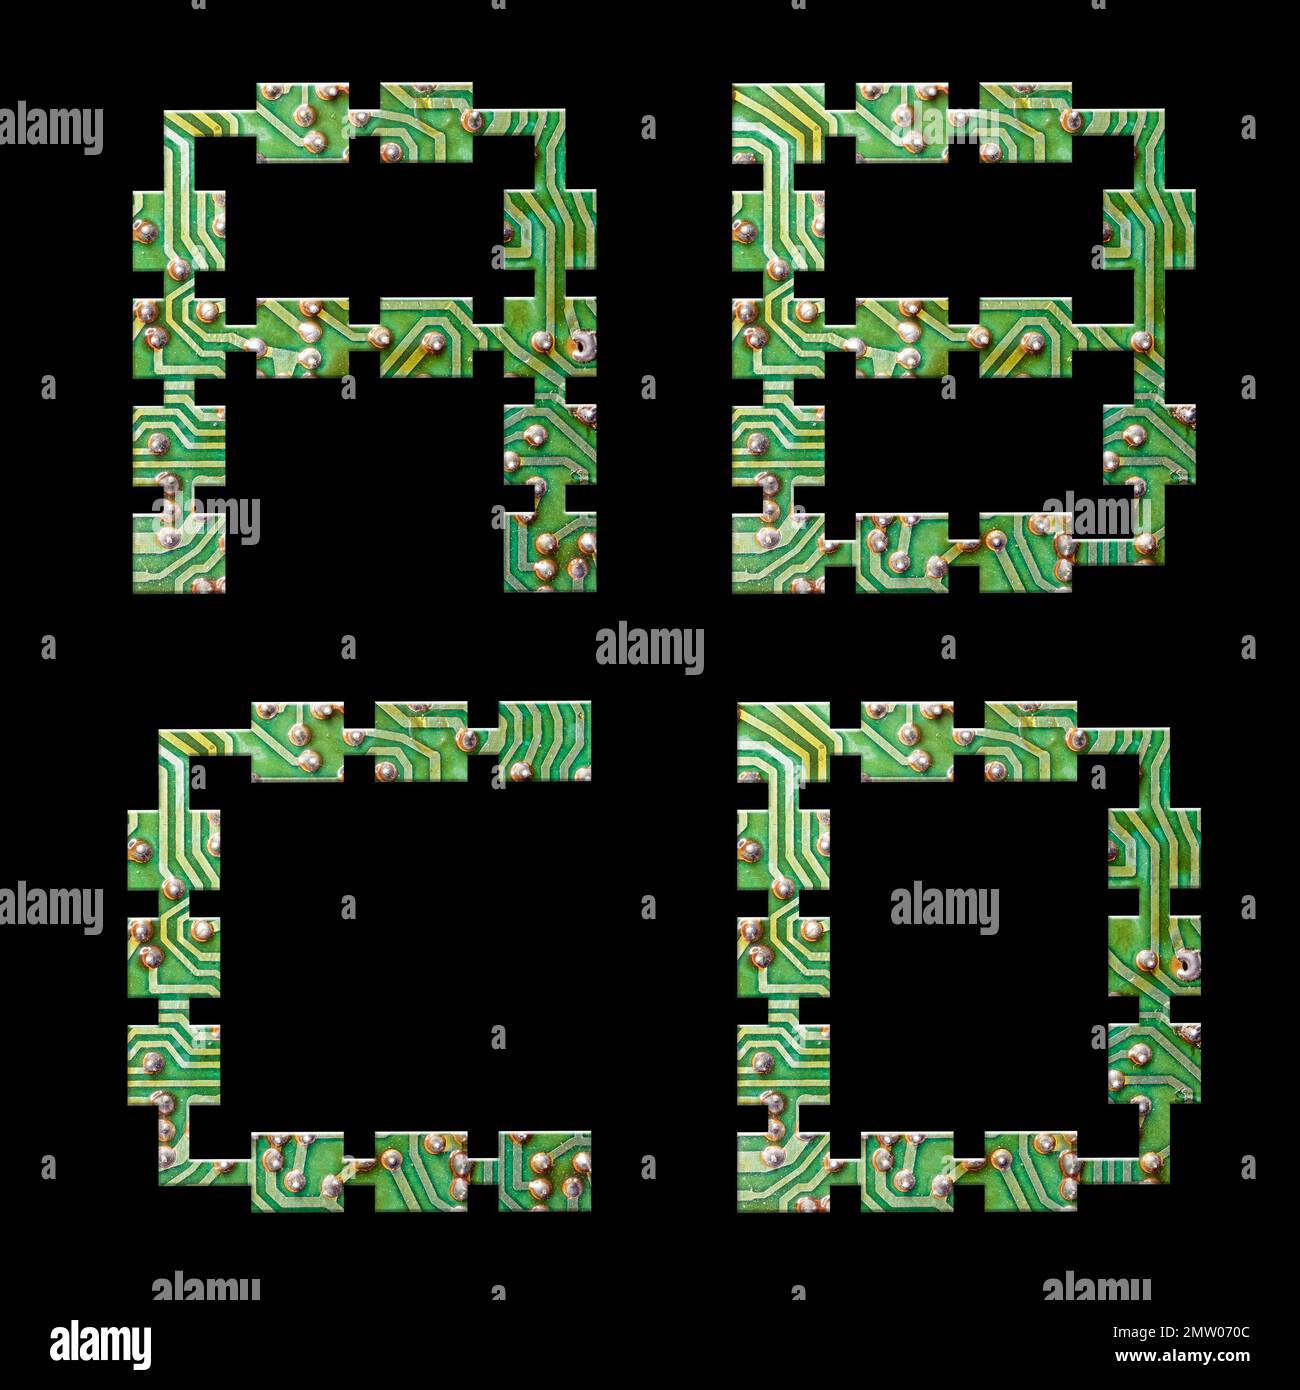 Illustration of Printed Circuit Board alphabet - letters A-D Stock Photo